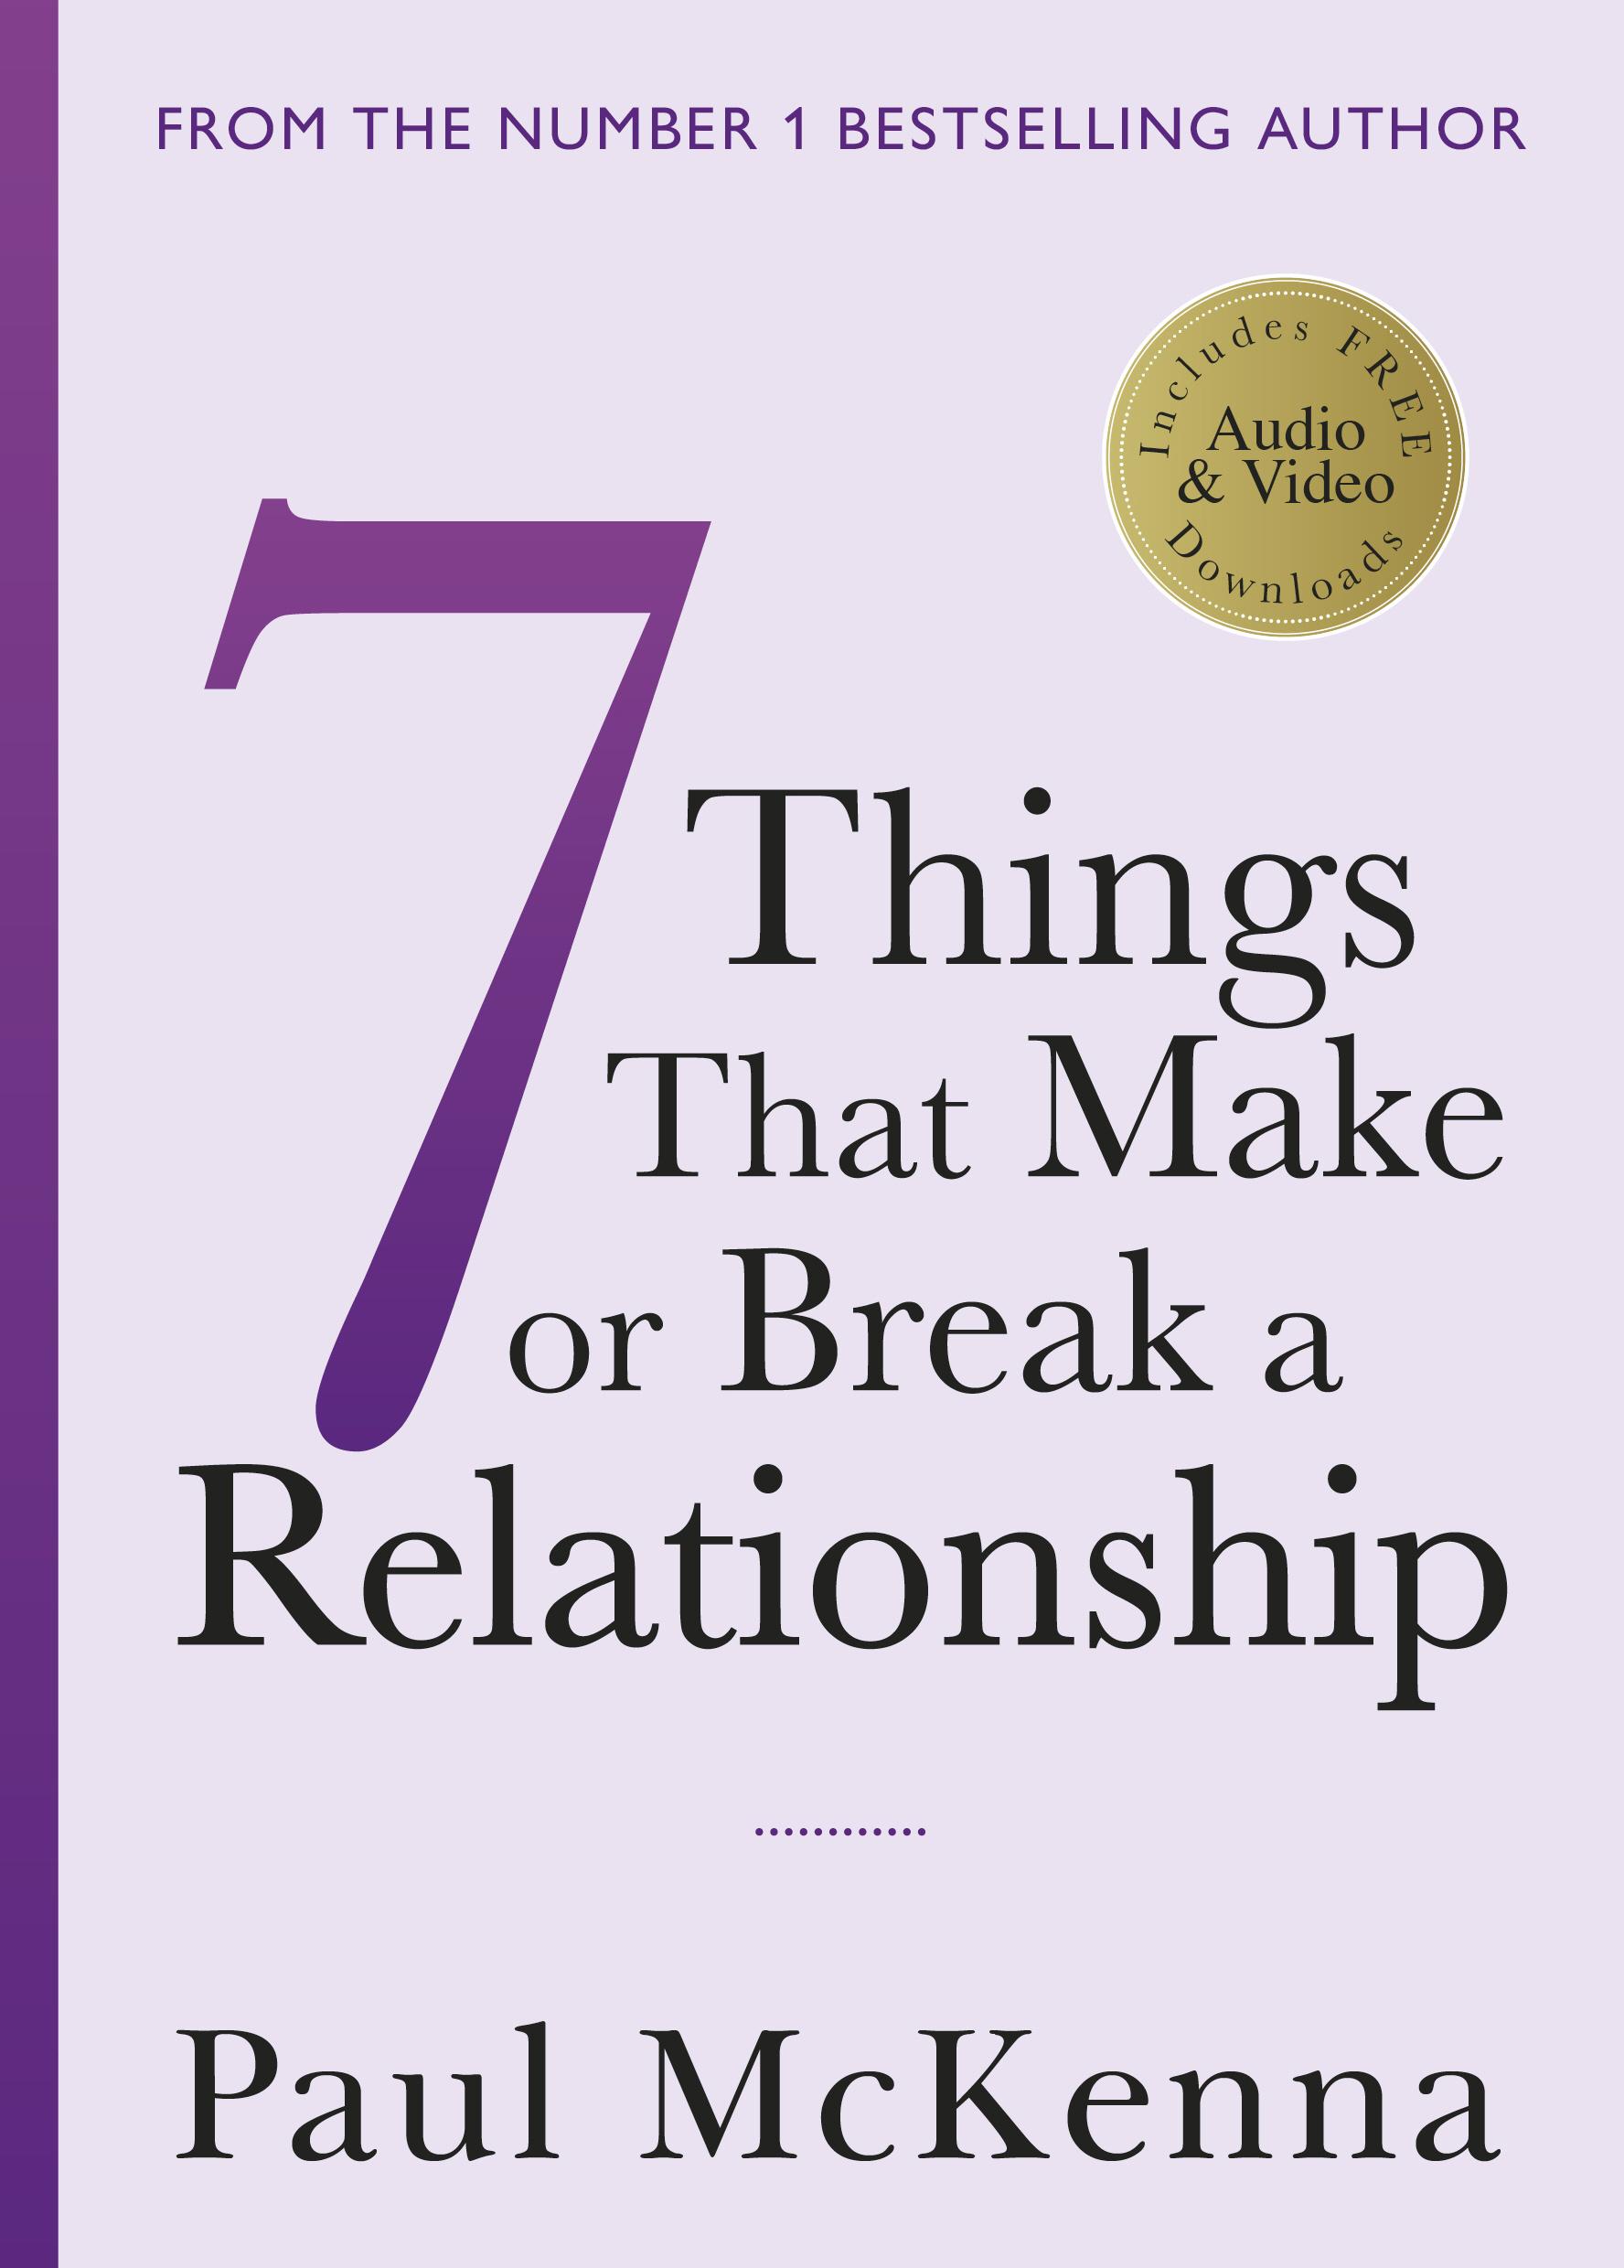 Seven Things That Make or Break a Relationship - Paul McKenna